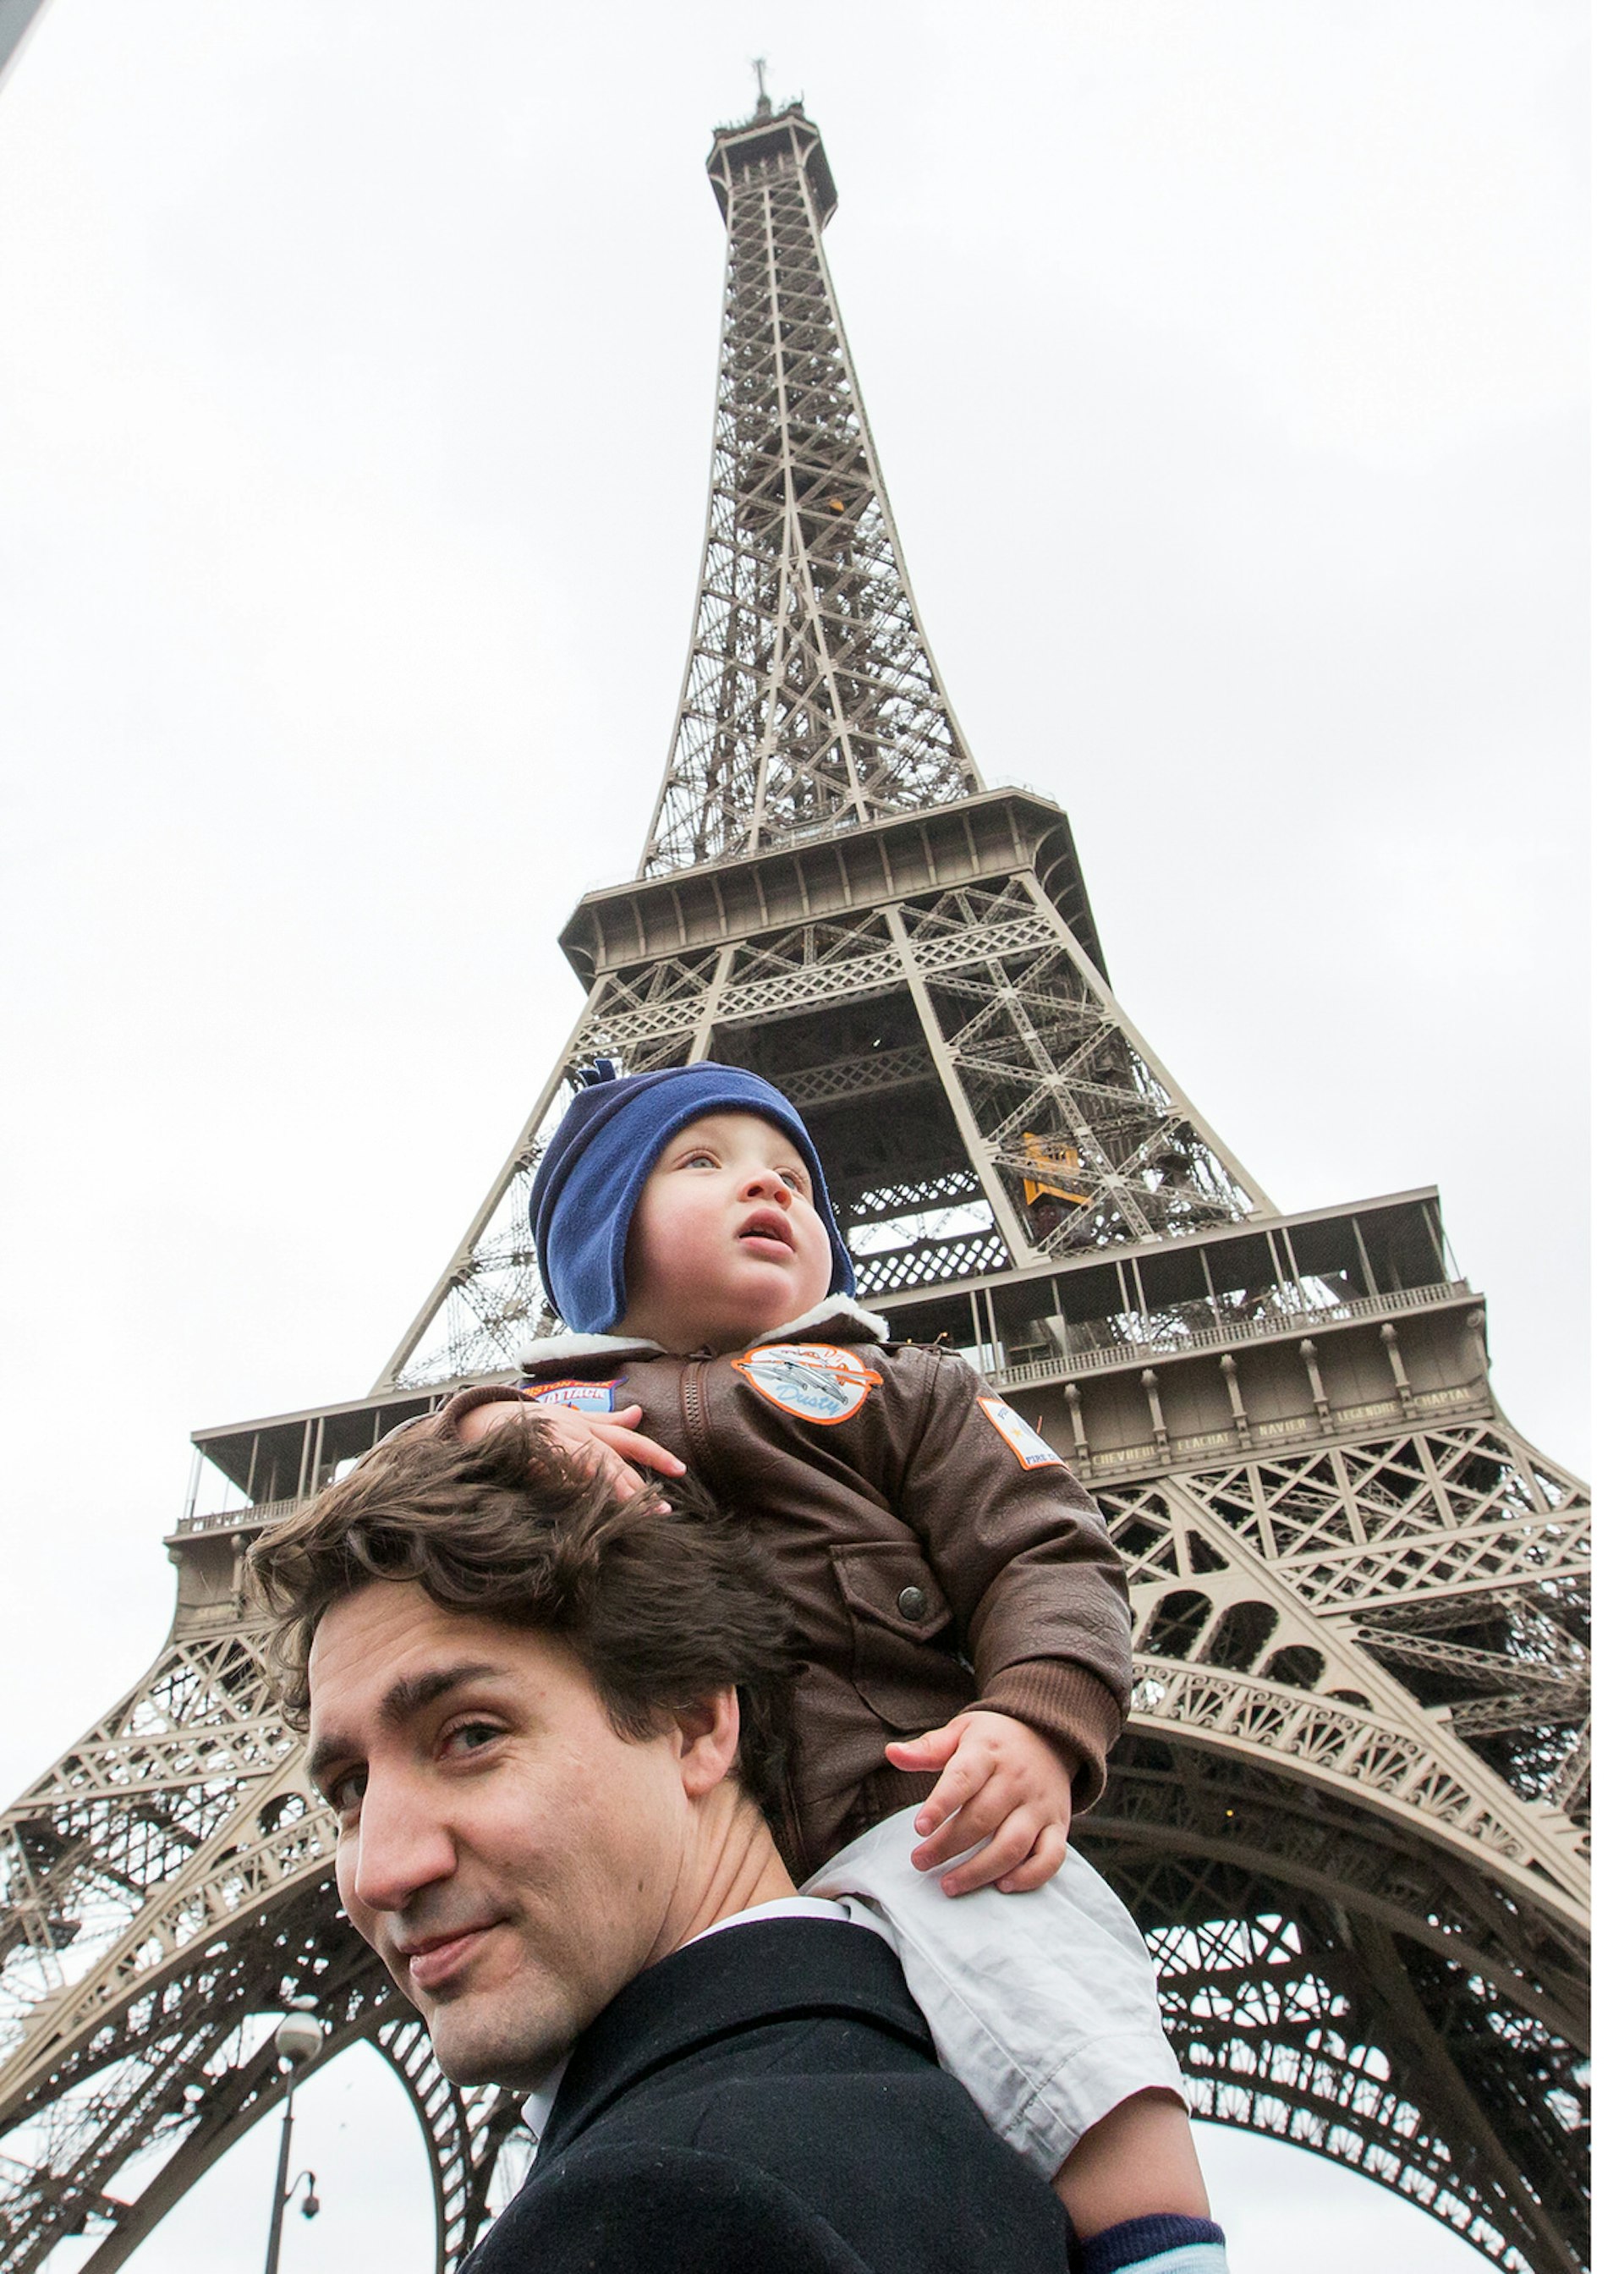 Canadian Prime Minister Justin Trudeau visiting Paris' Eiffel Tower with his youngest child, Hadrien © Adam Scotti / PMO